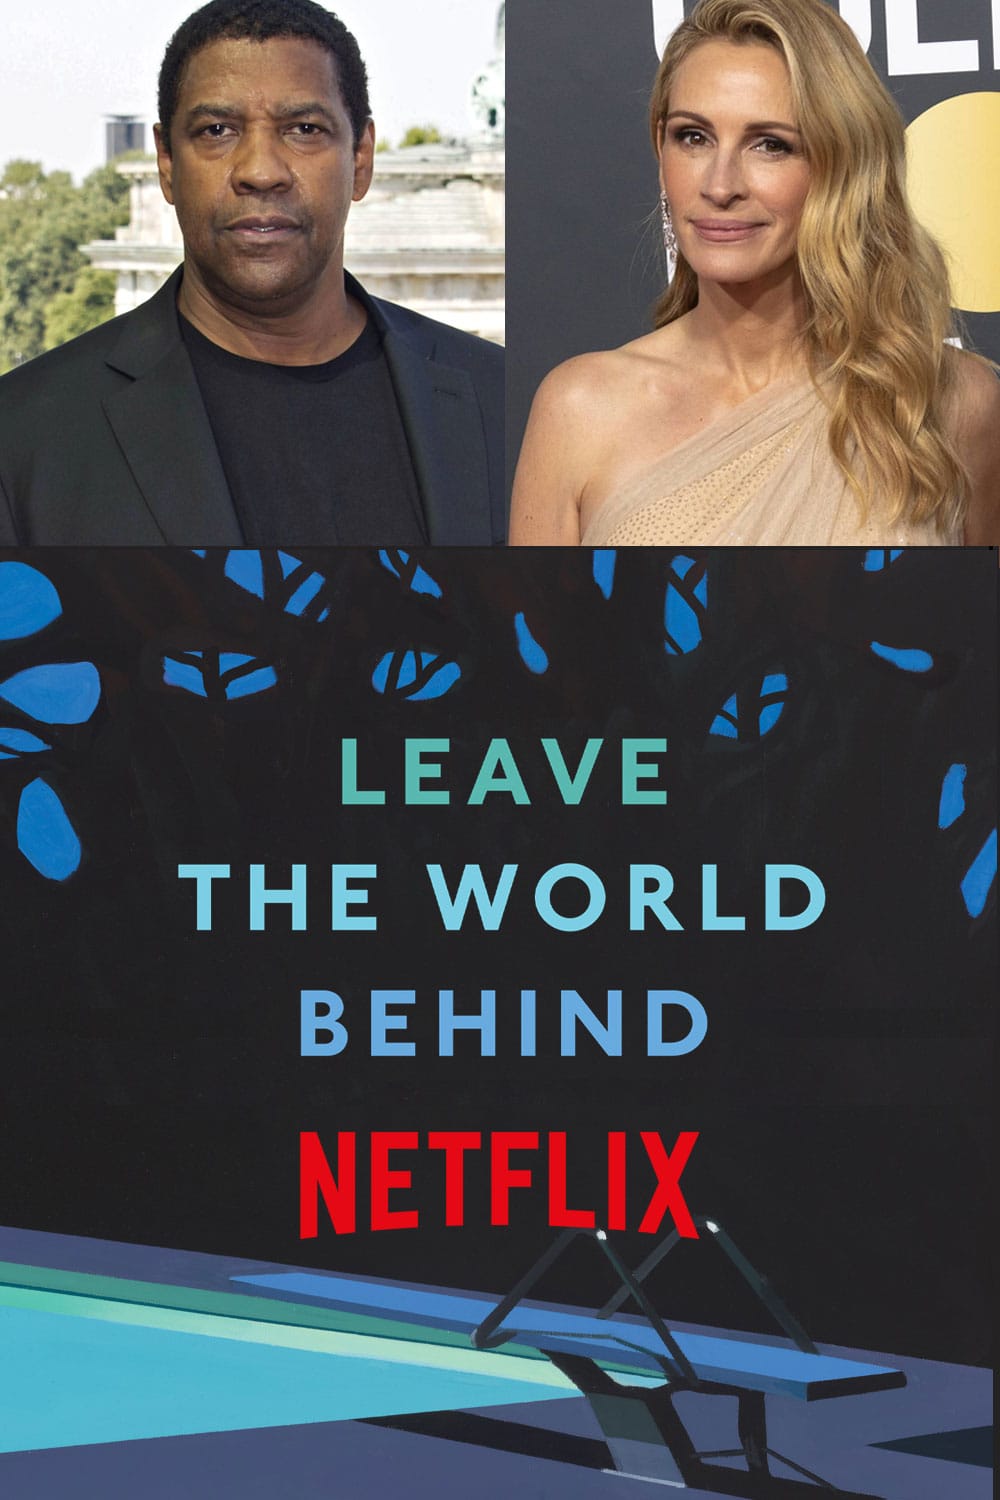 Leave the World Behind Netflix Movie What We Know (Release Date, Cast